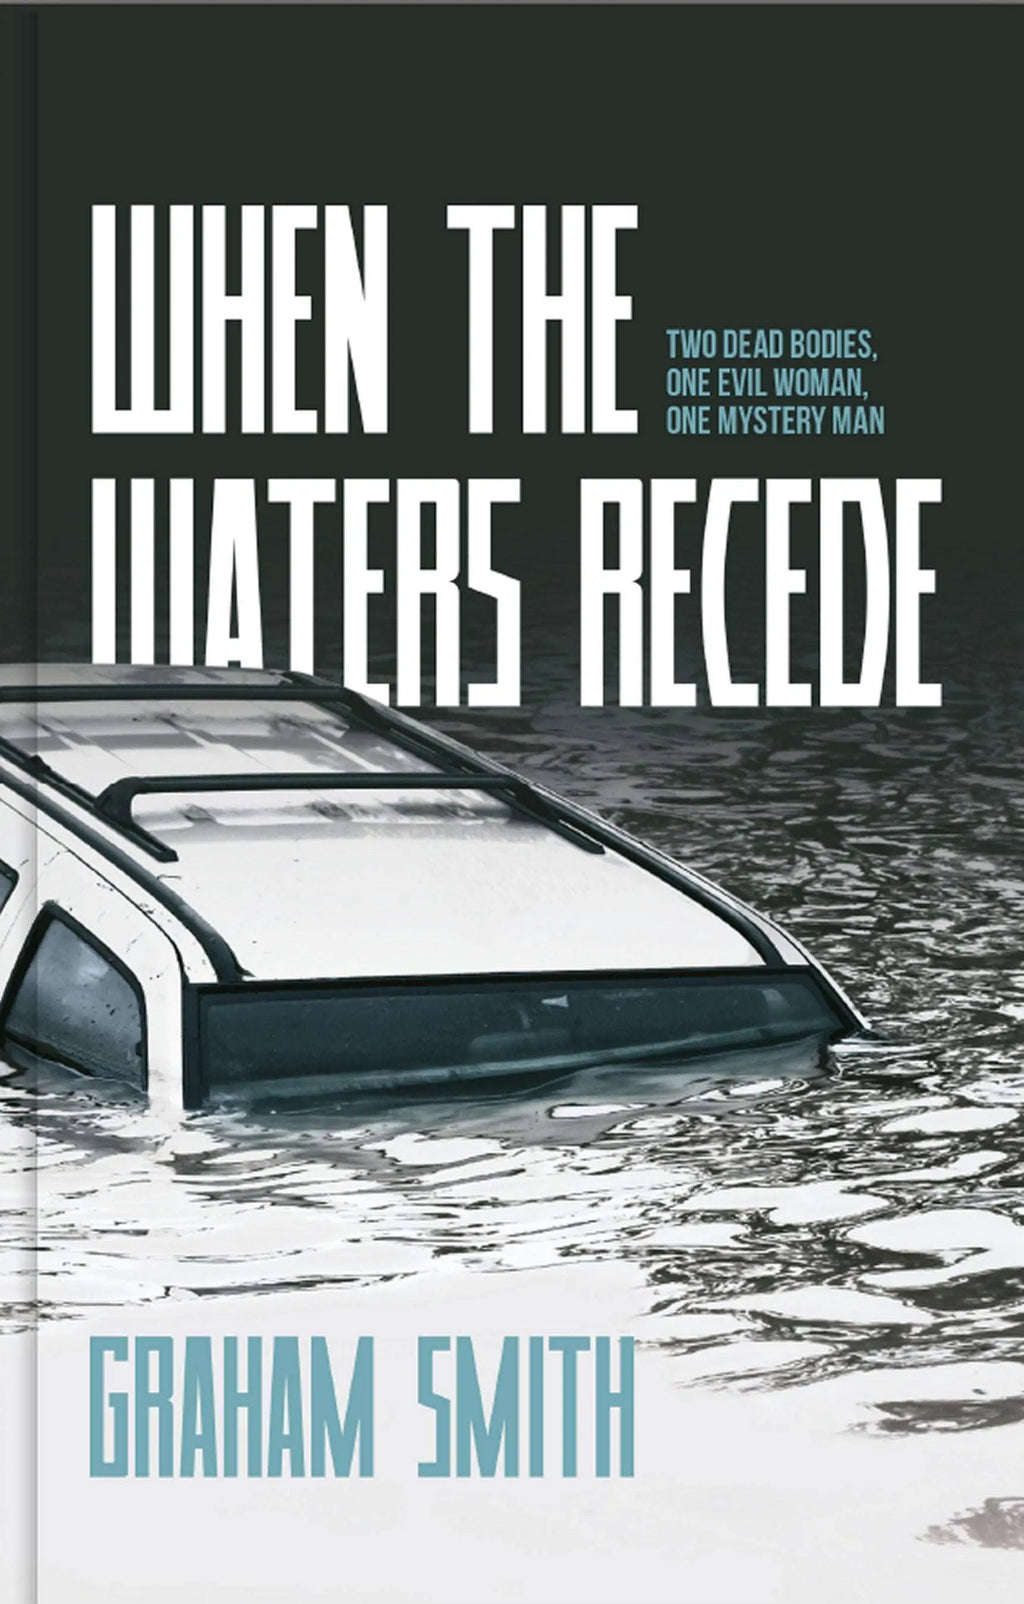 When The Waters Recede - DI Harry EvansWhen a car is pulled from raging floodwaters with a dead man in the front and the decapitated body of an evil woman in the boot, Cumbria’s Major Crimes Team are handPaperbackCaffeine NightsCaffeine Nights BooksWaters Recede - DI Harry Evans